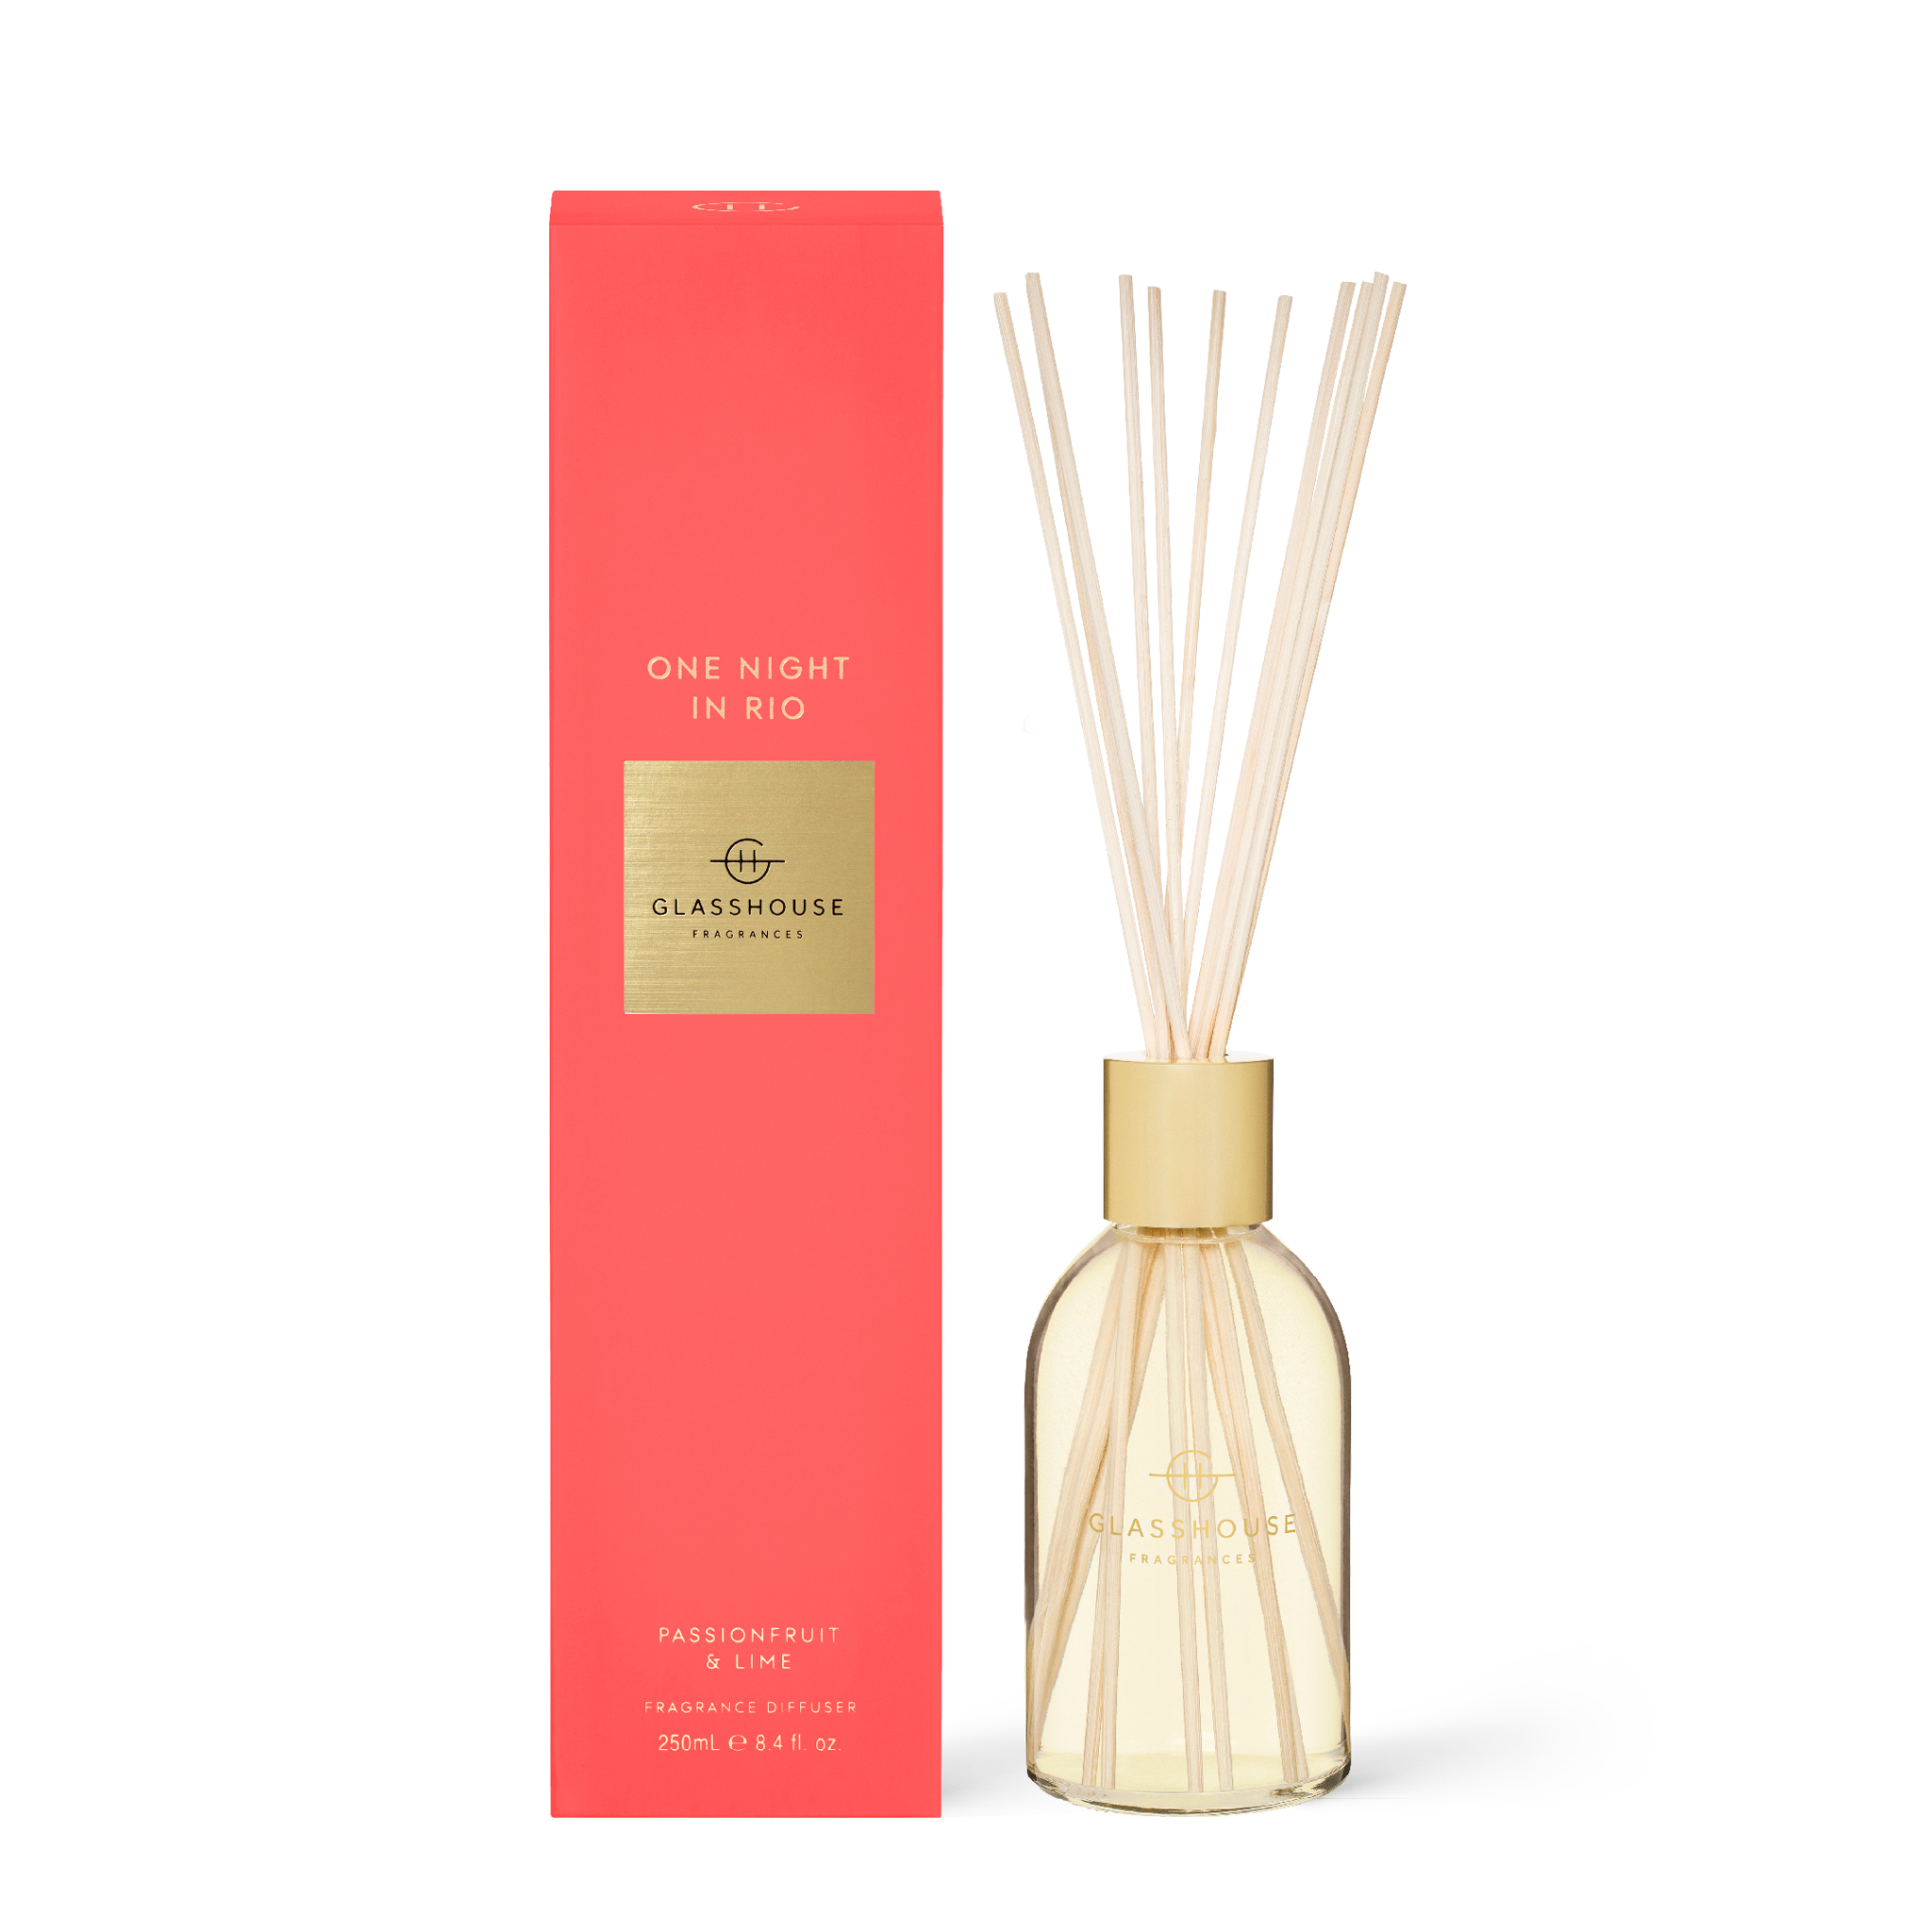 Glasshouse Fragrances One Night in Rio Passionfruit and Lime  250mL Fragrance Diffuser with box